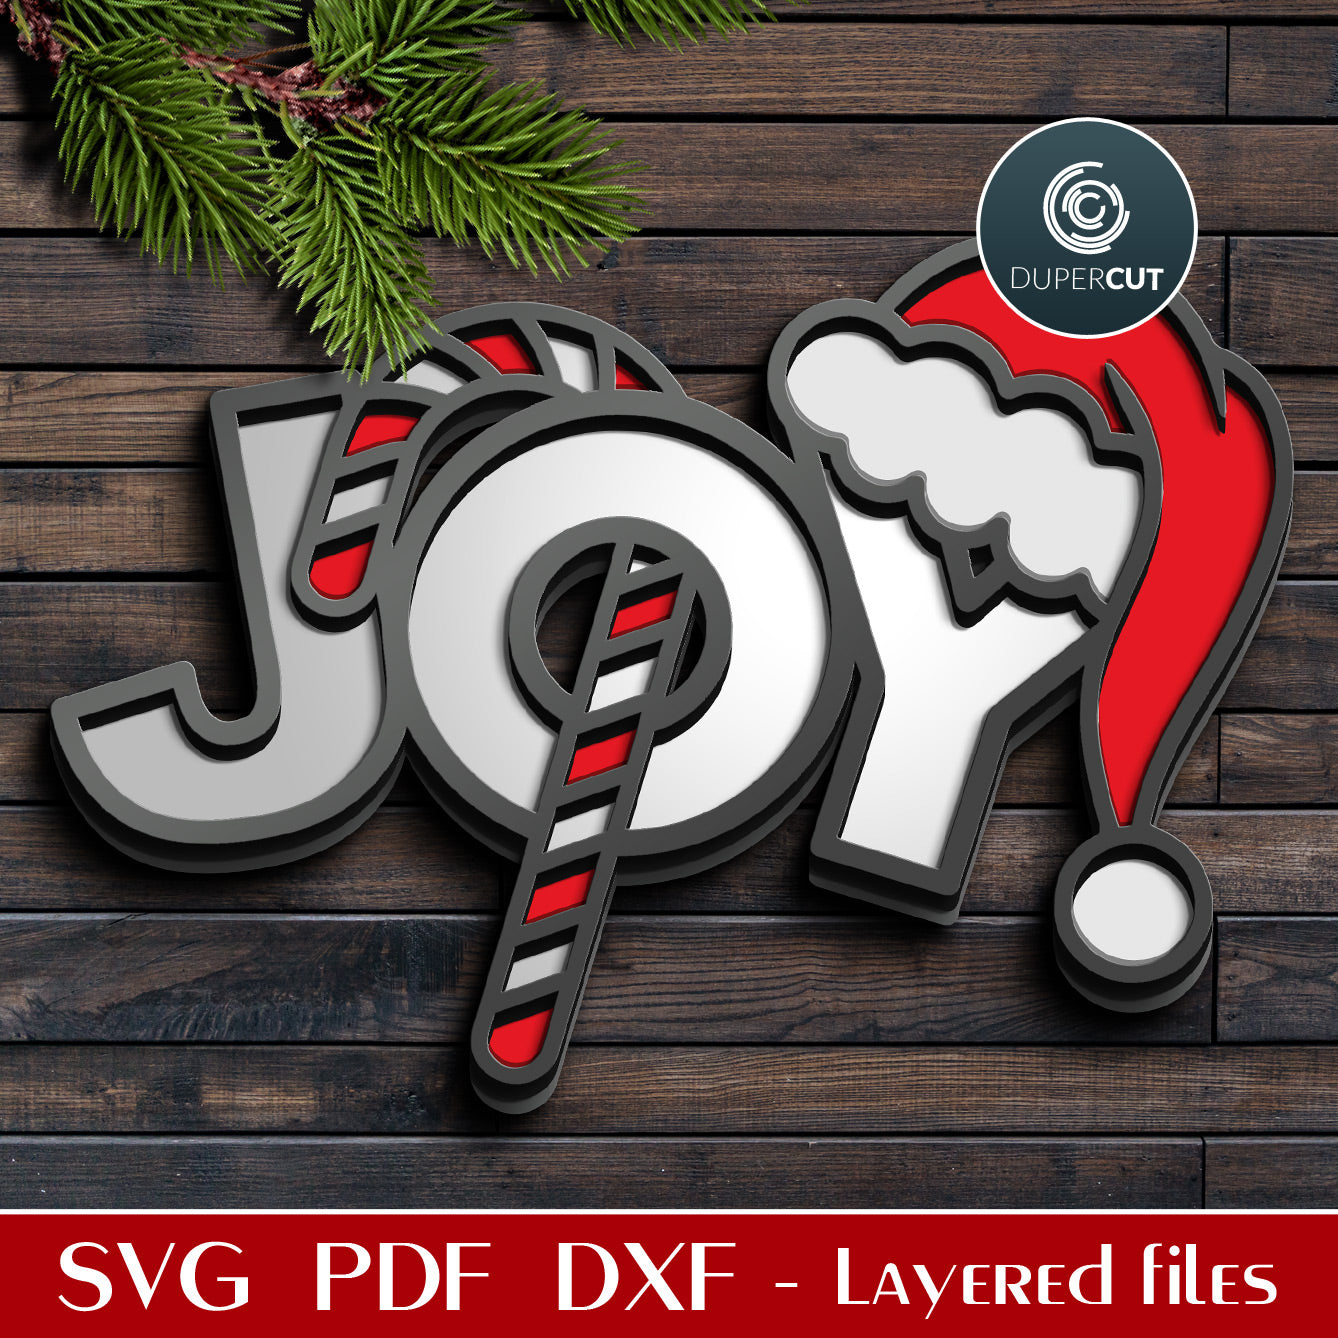 Joy with Santa hat holiday sign door hanger pattern - SVG DXF layered cutting files for Glowforge, Cricut, scroll saw, CNC plasma machines by DuperCut.com